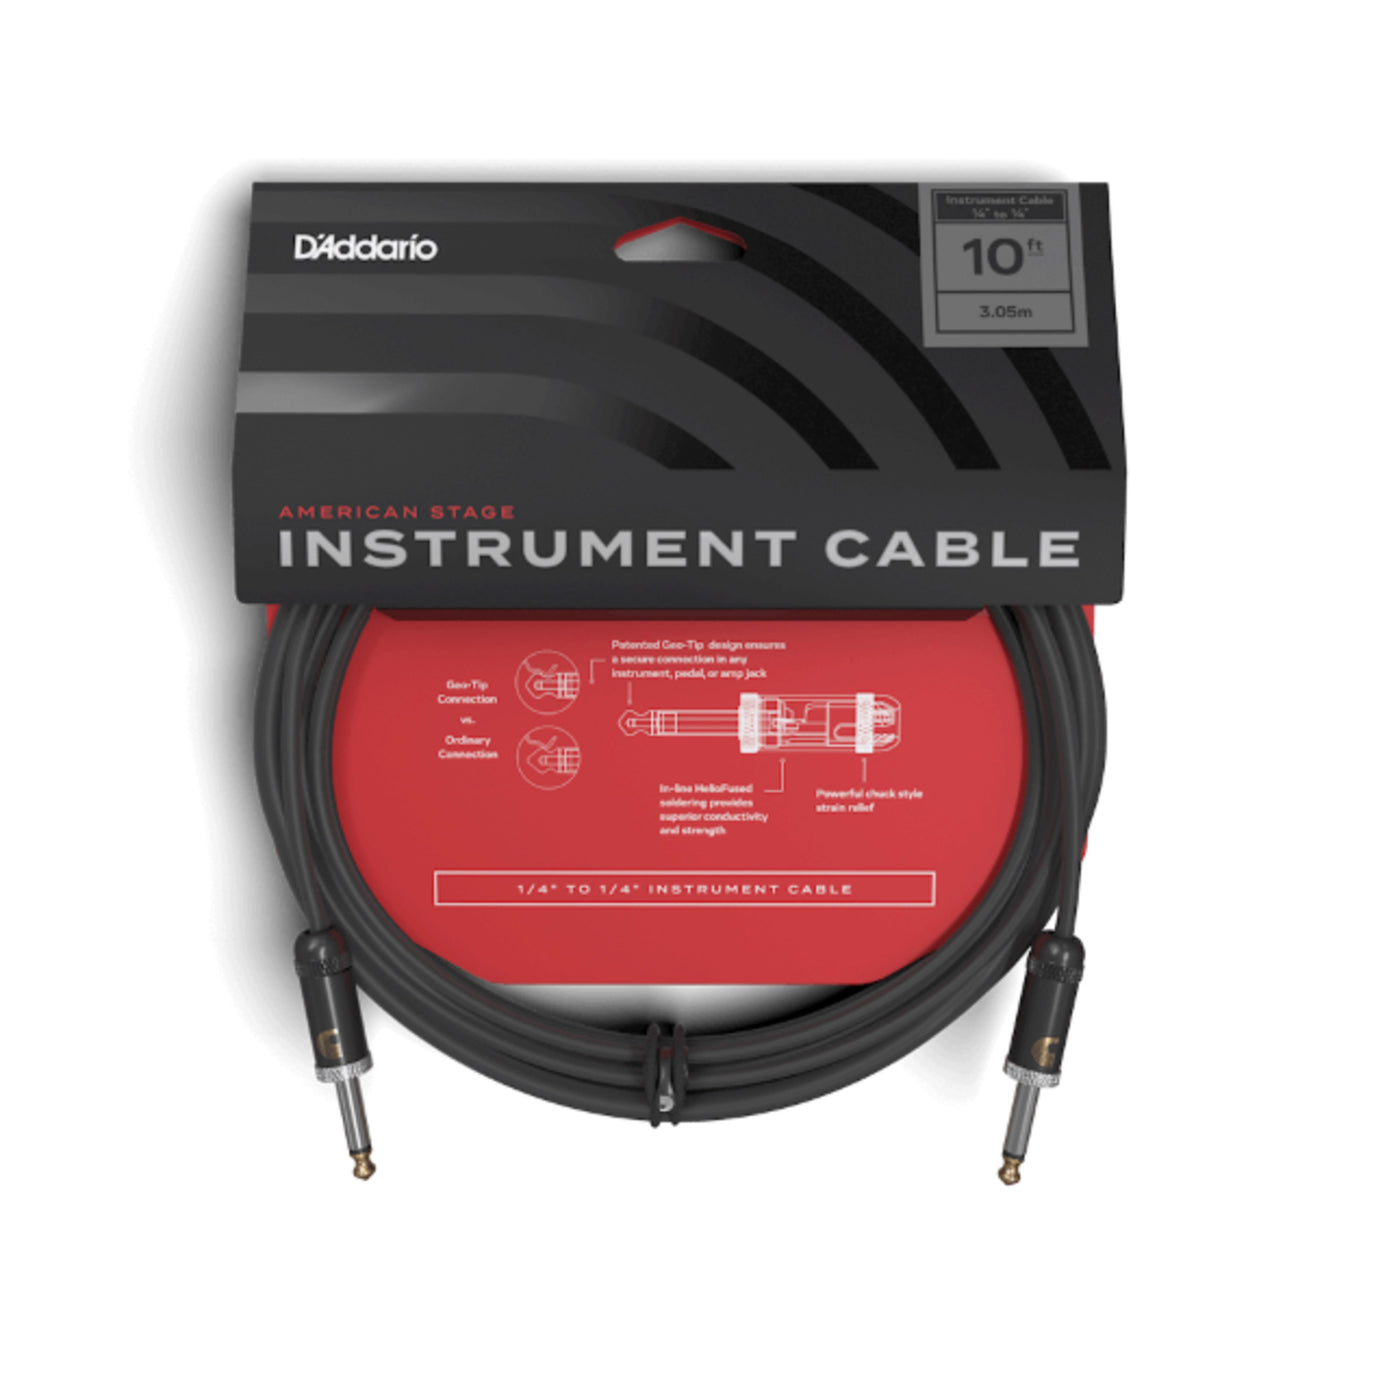 D'Addario American Stage Instrument Cable, Right Angle, 20 feet (PW-AMSGRA-20)